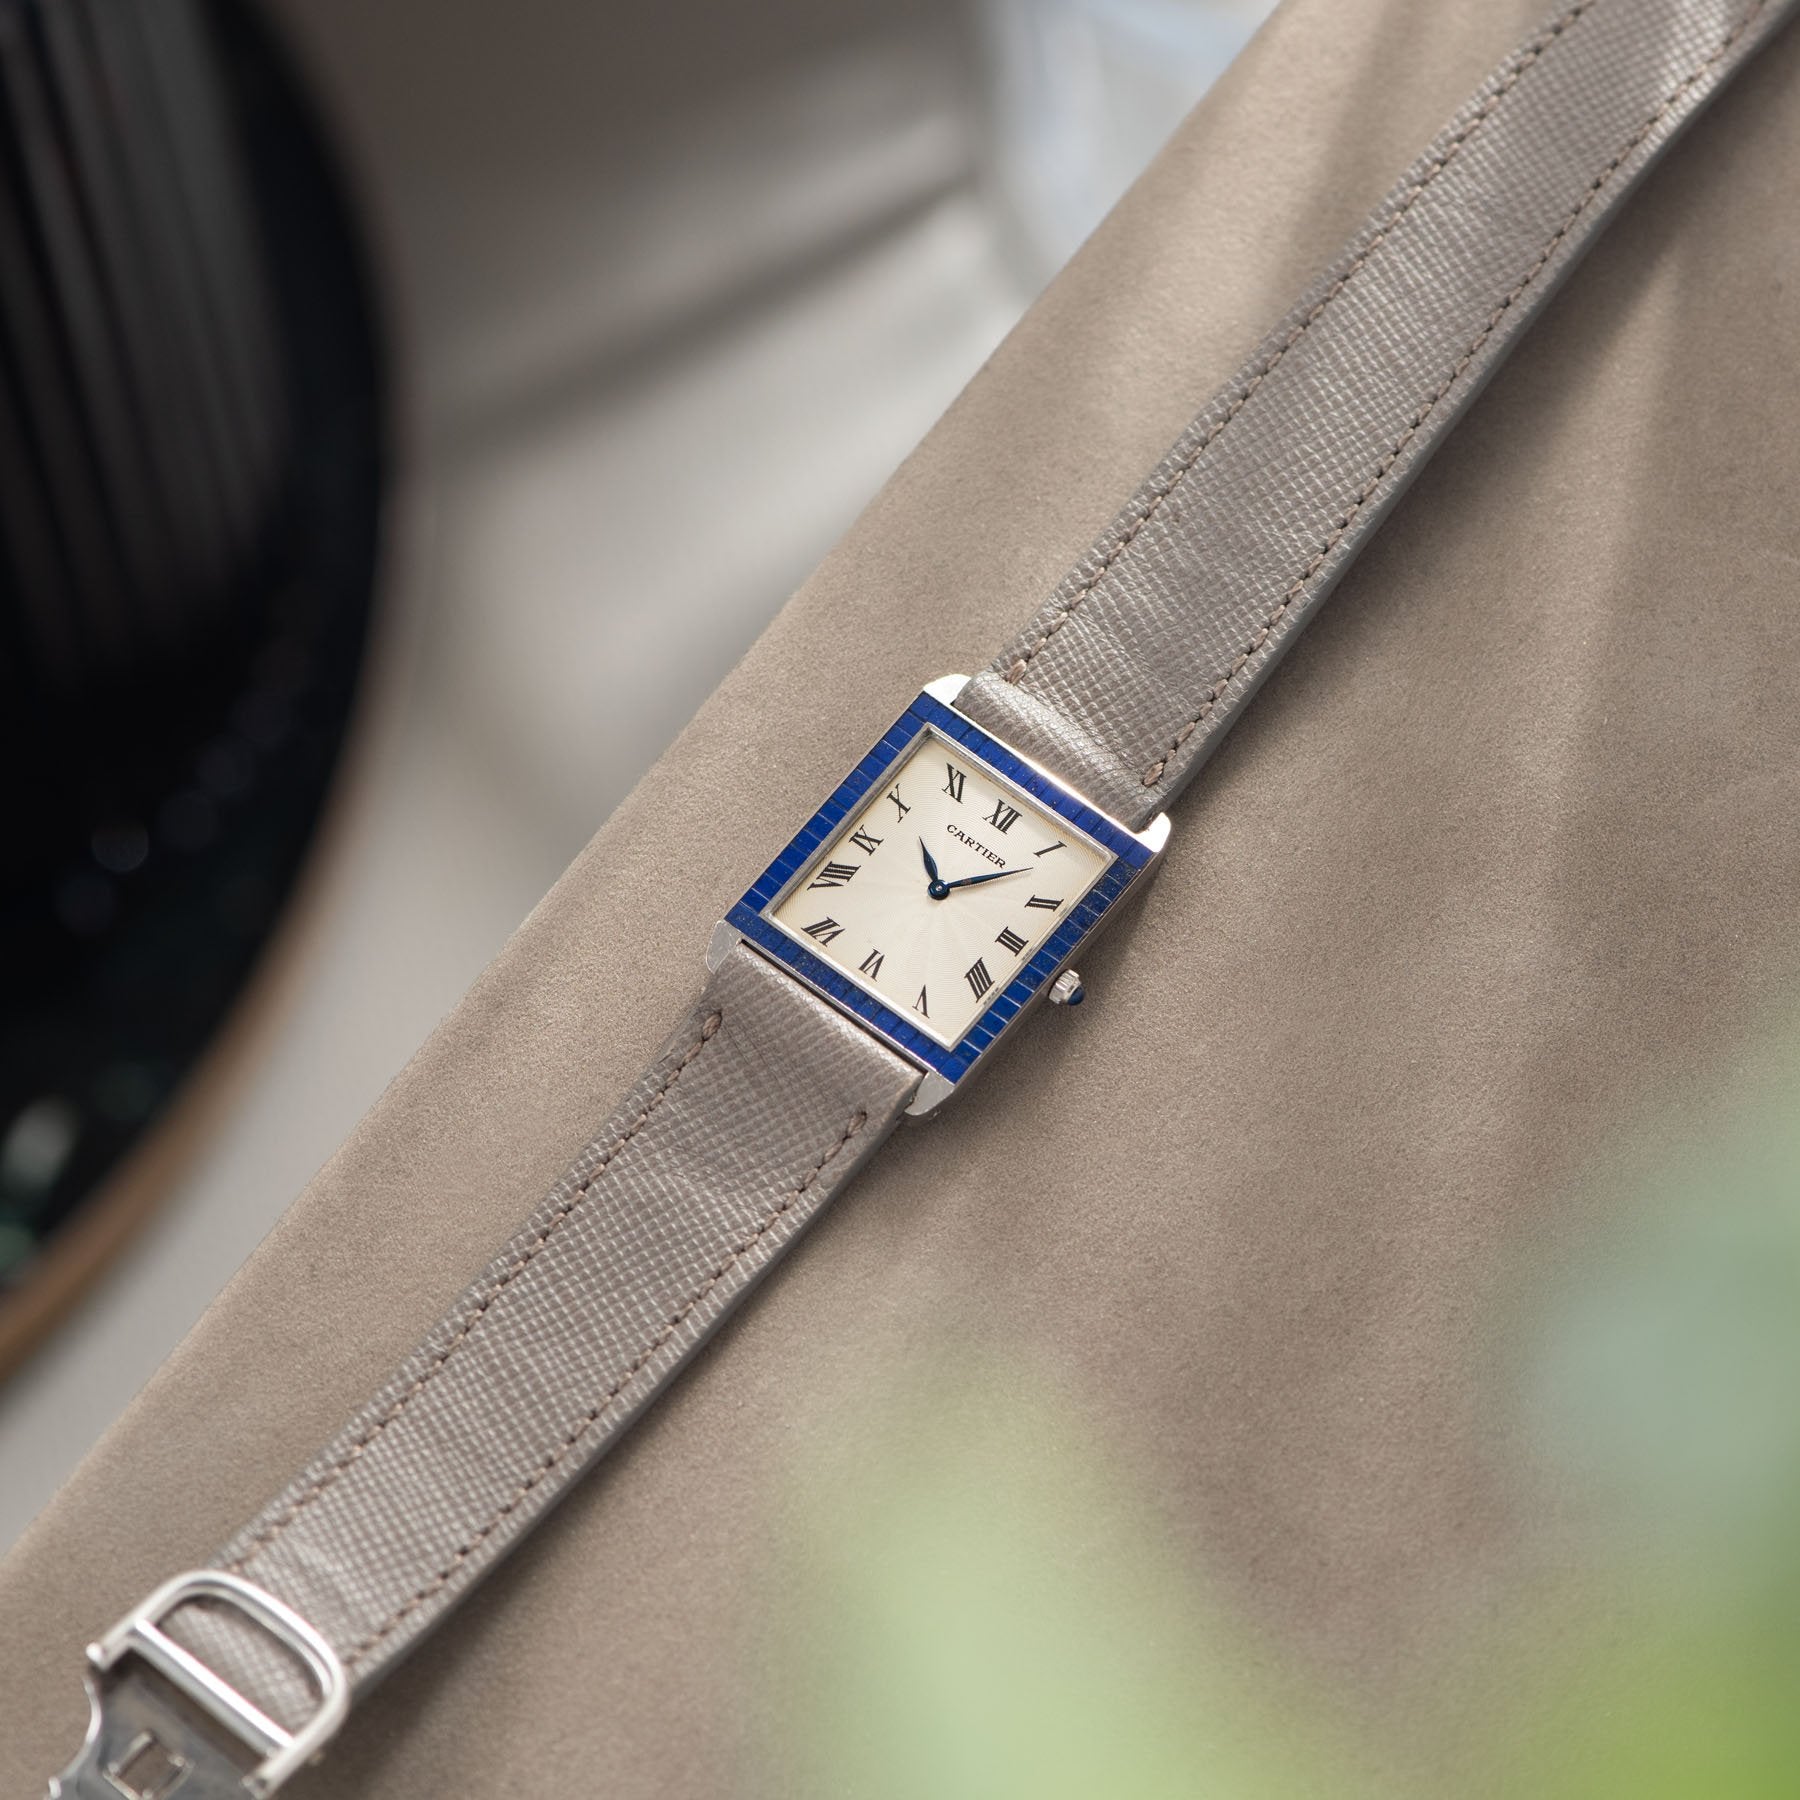 Cartier by Piaget White Gold and Lapis Lazuli watch